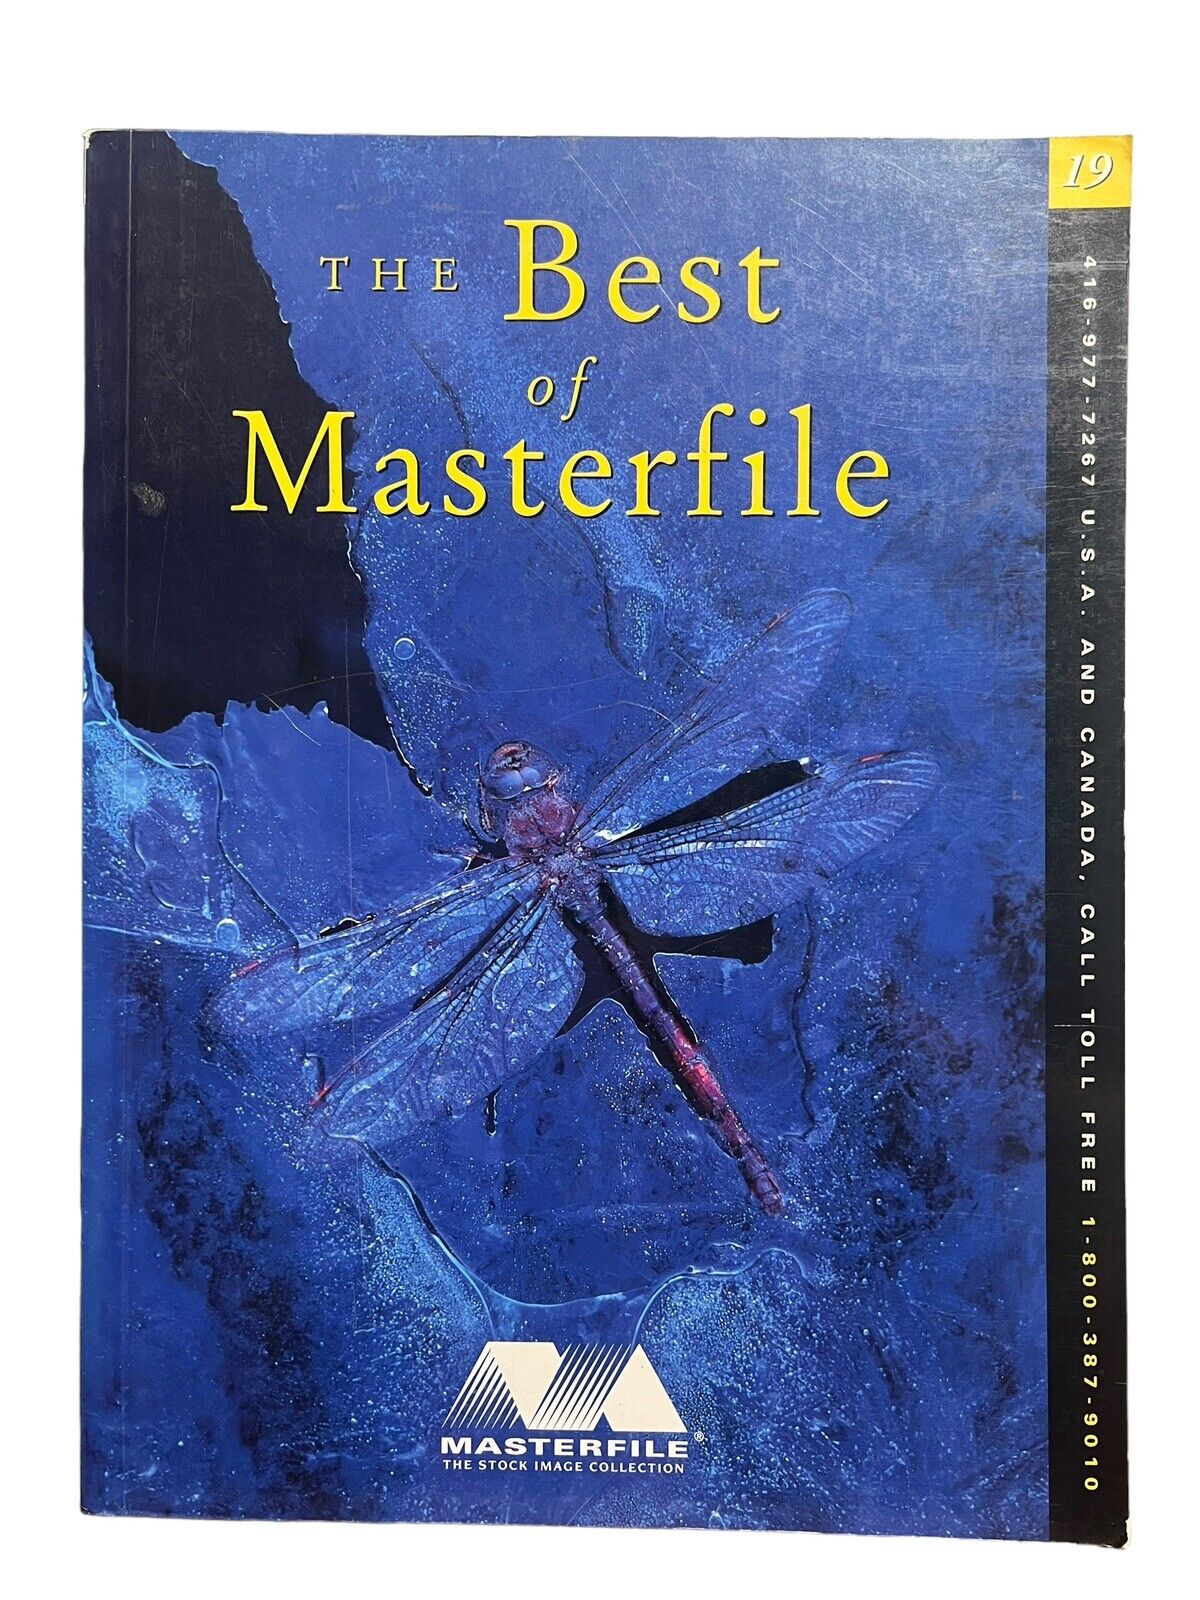 The Best of Masterfile No. 19 Paperback Book